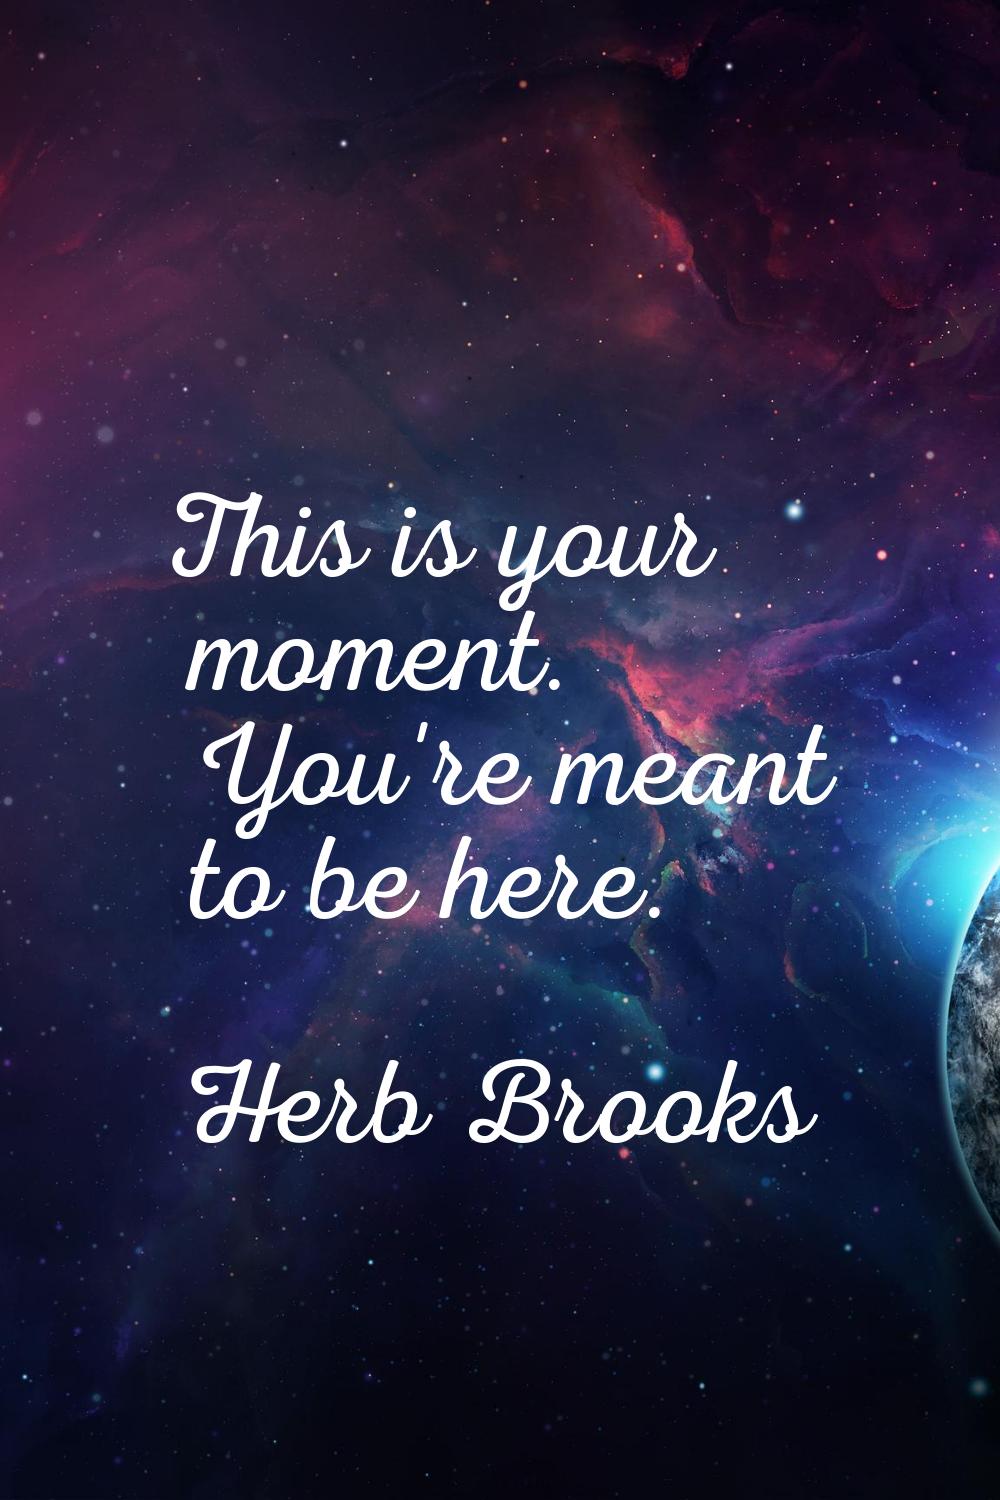 This is your moment. You're meant to be here.